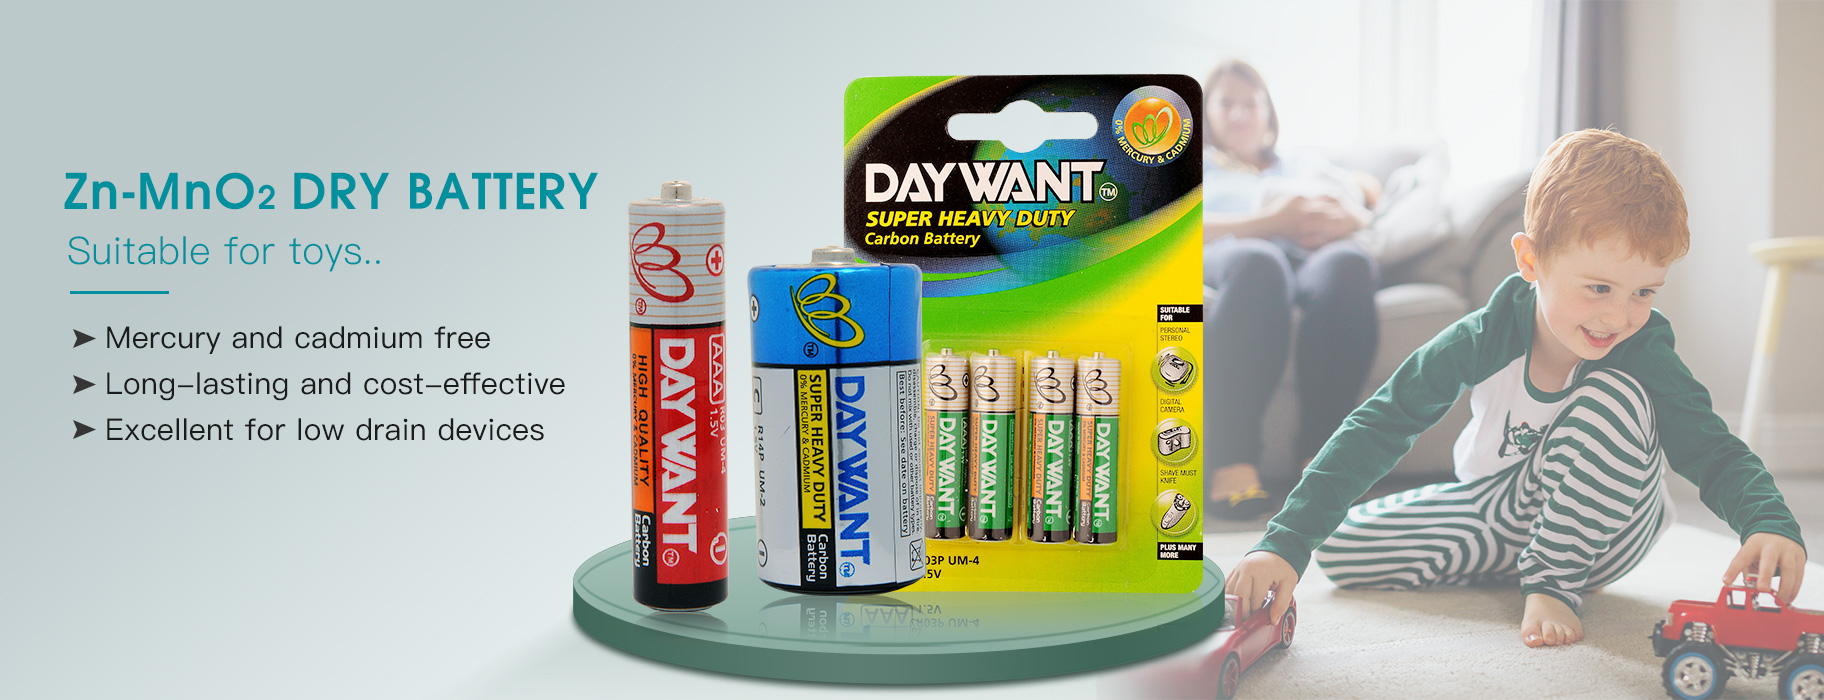 Dry Battery Manufacturers